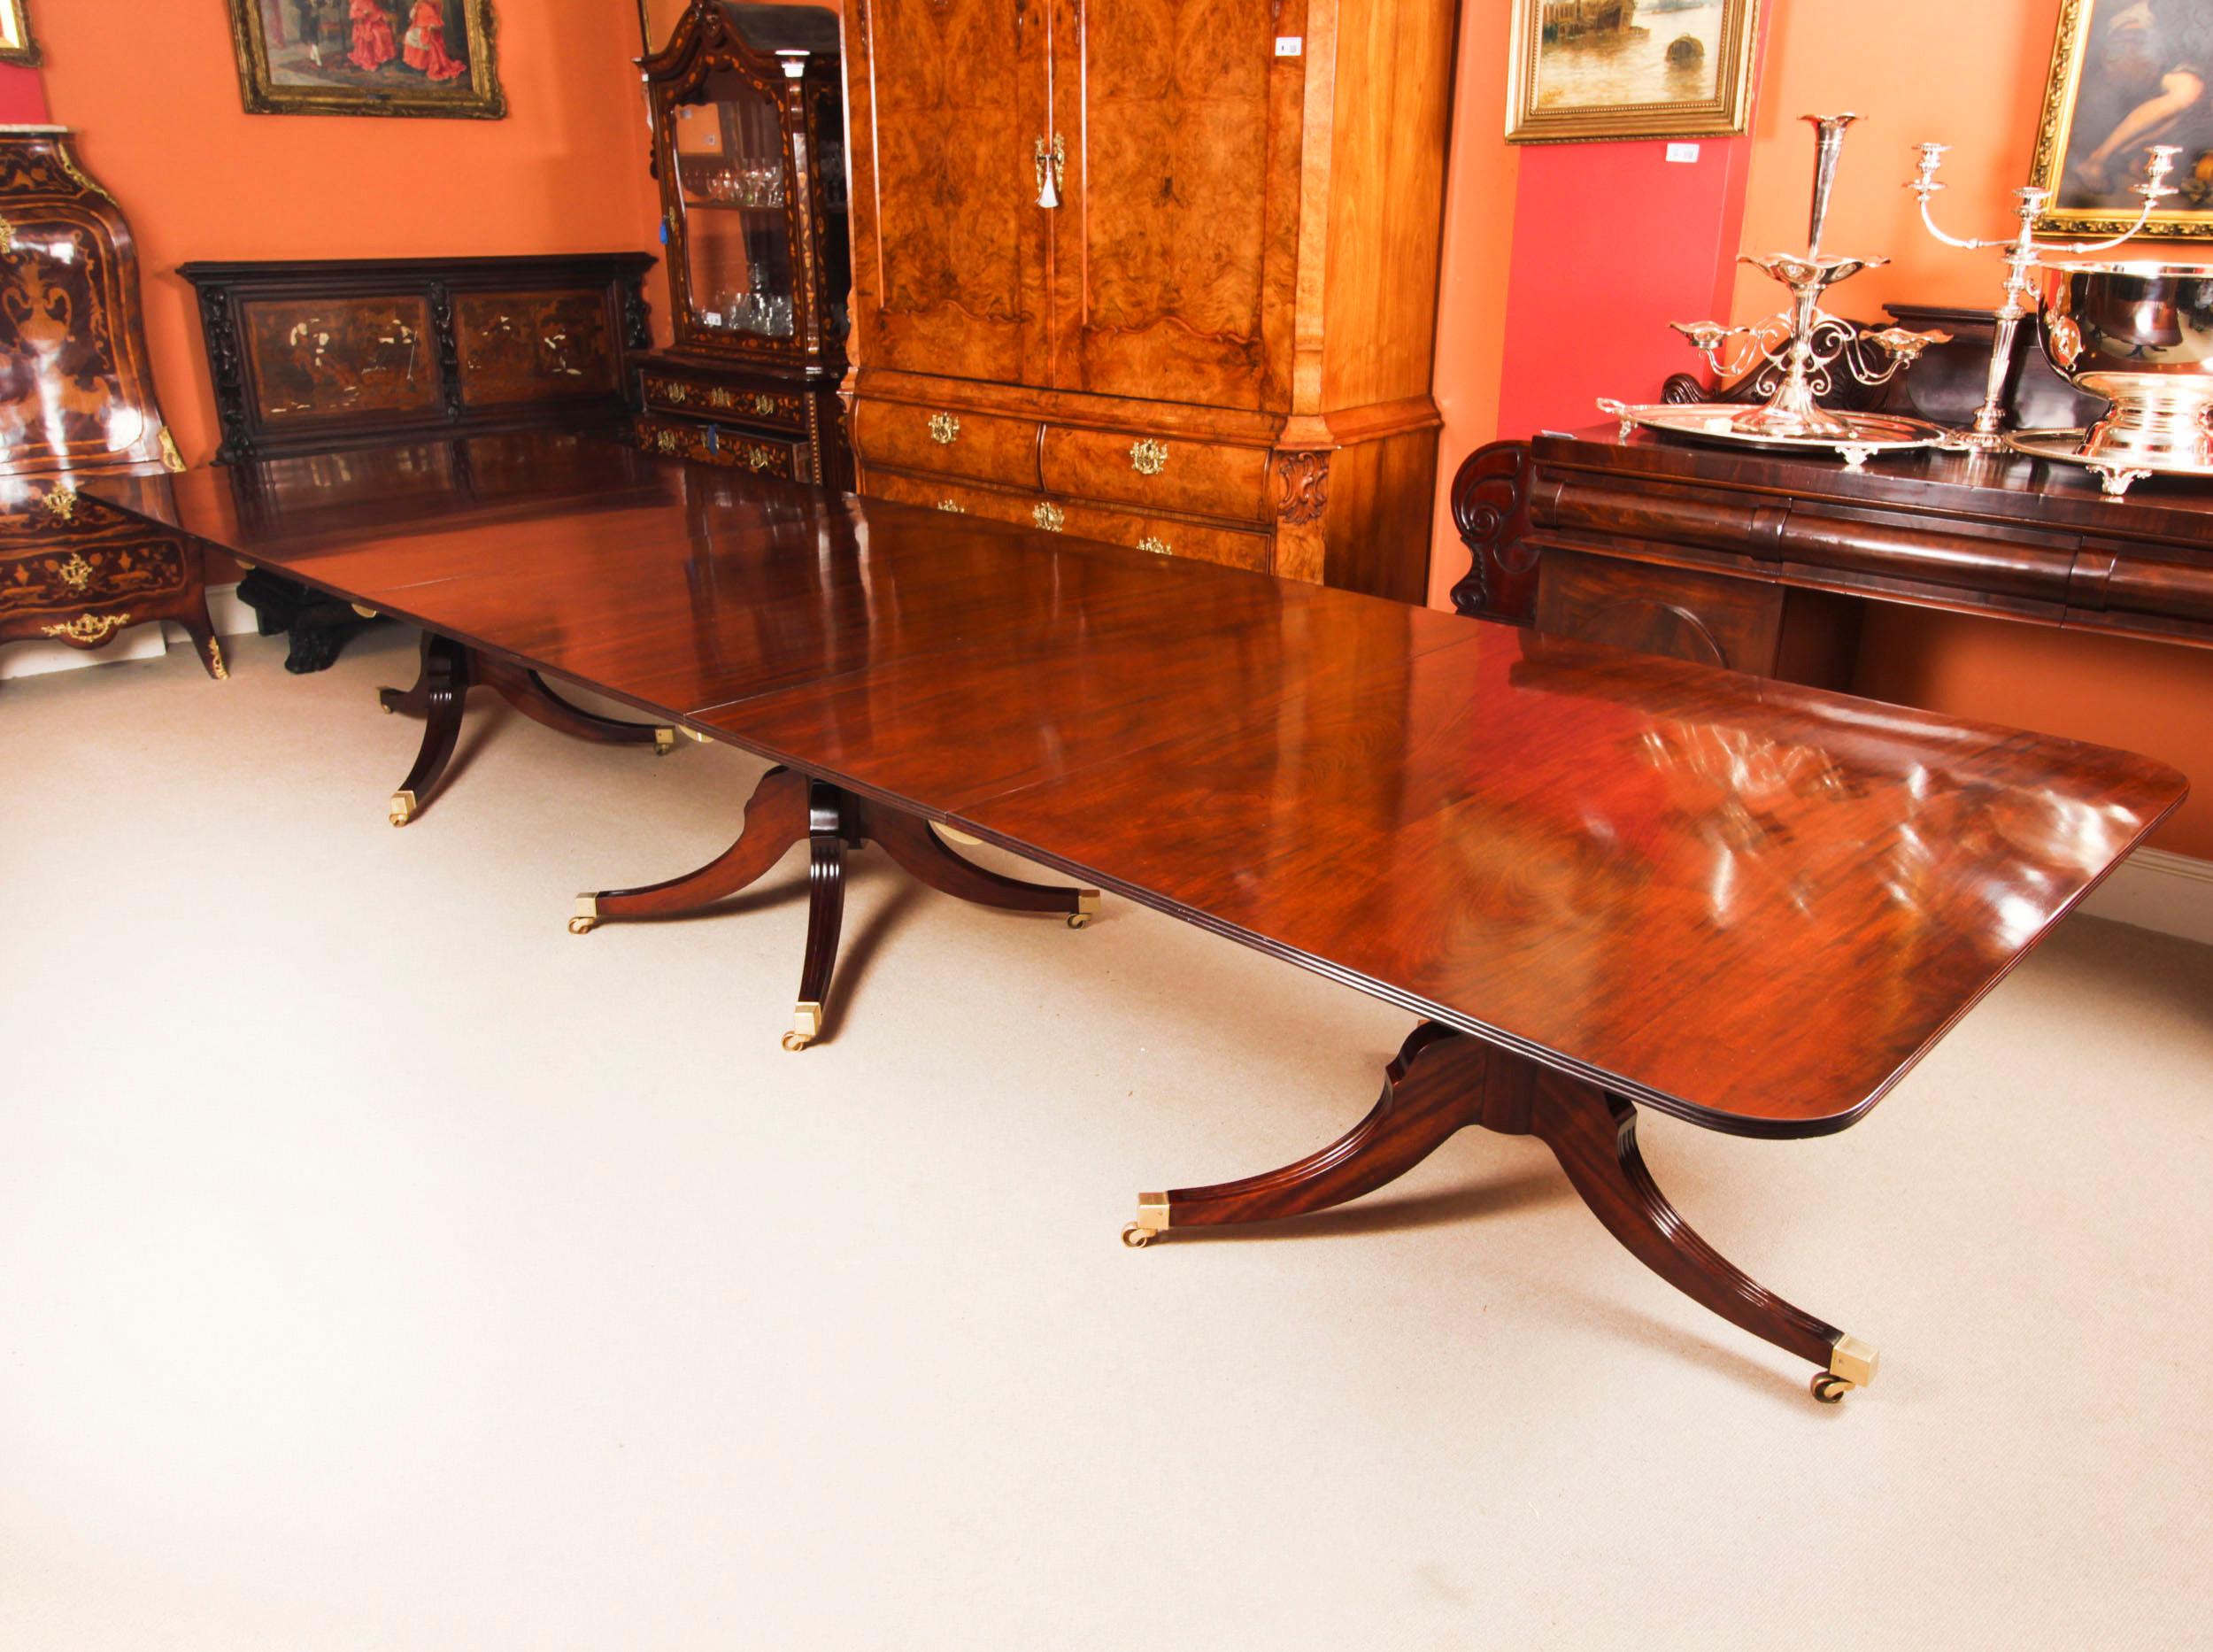 Antique 14ft Regency Revival Triple Pillar Dining Table & 14 Chairs 19th Century In Good Condition For Sale In London, GB